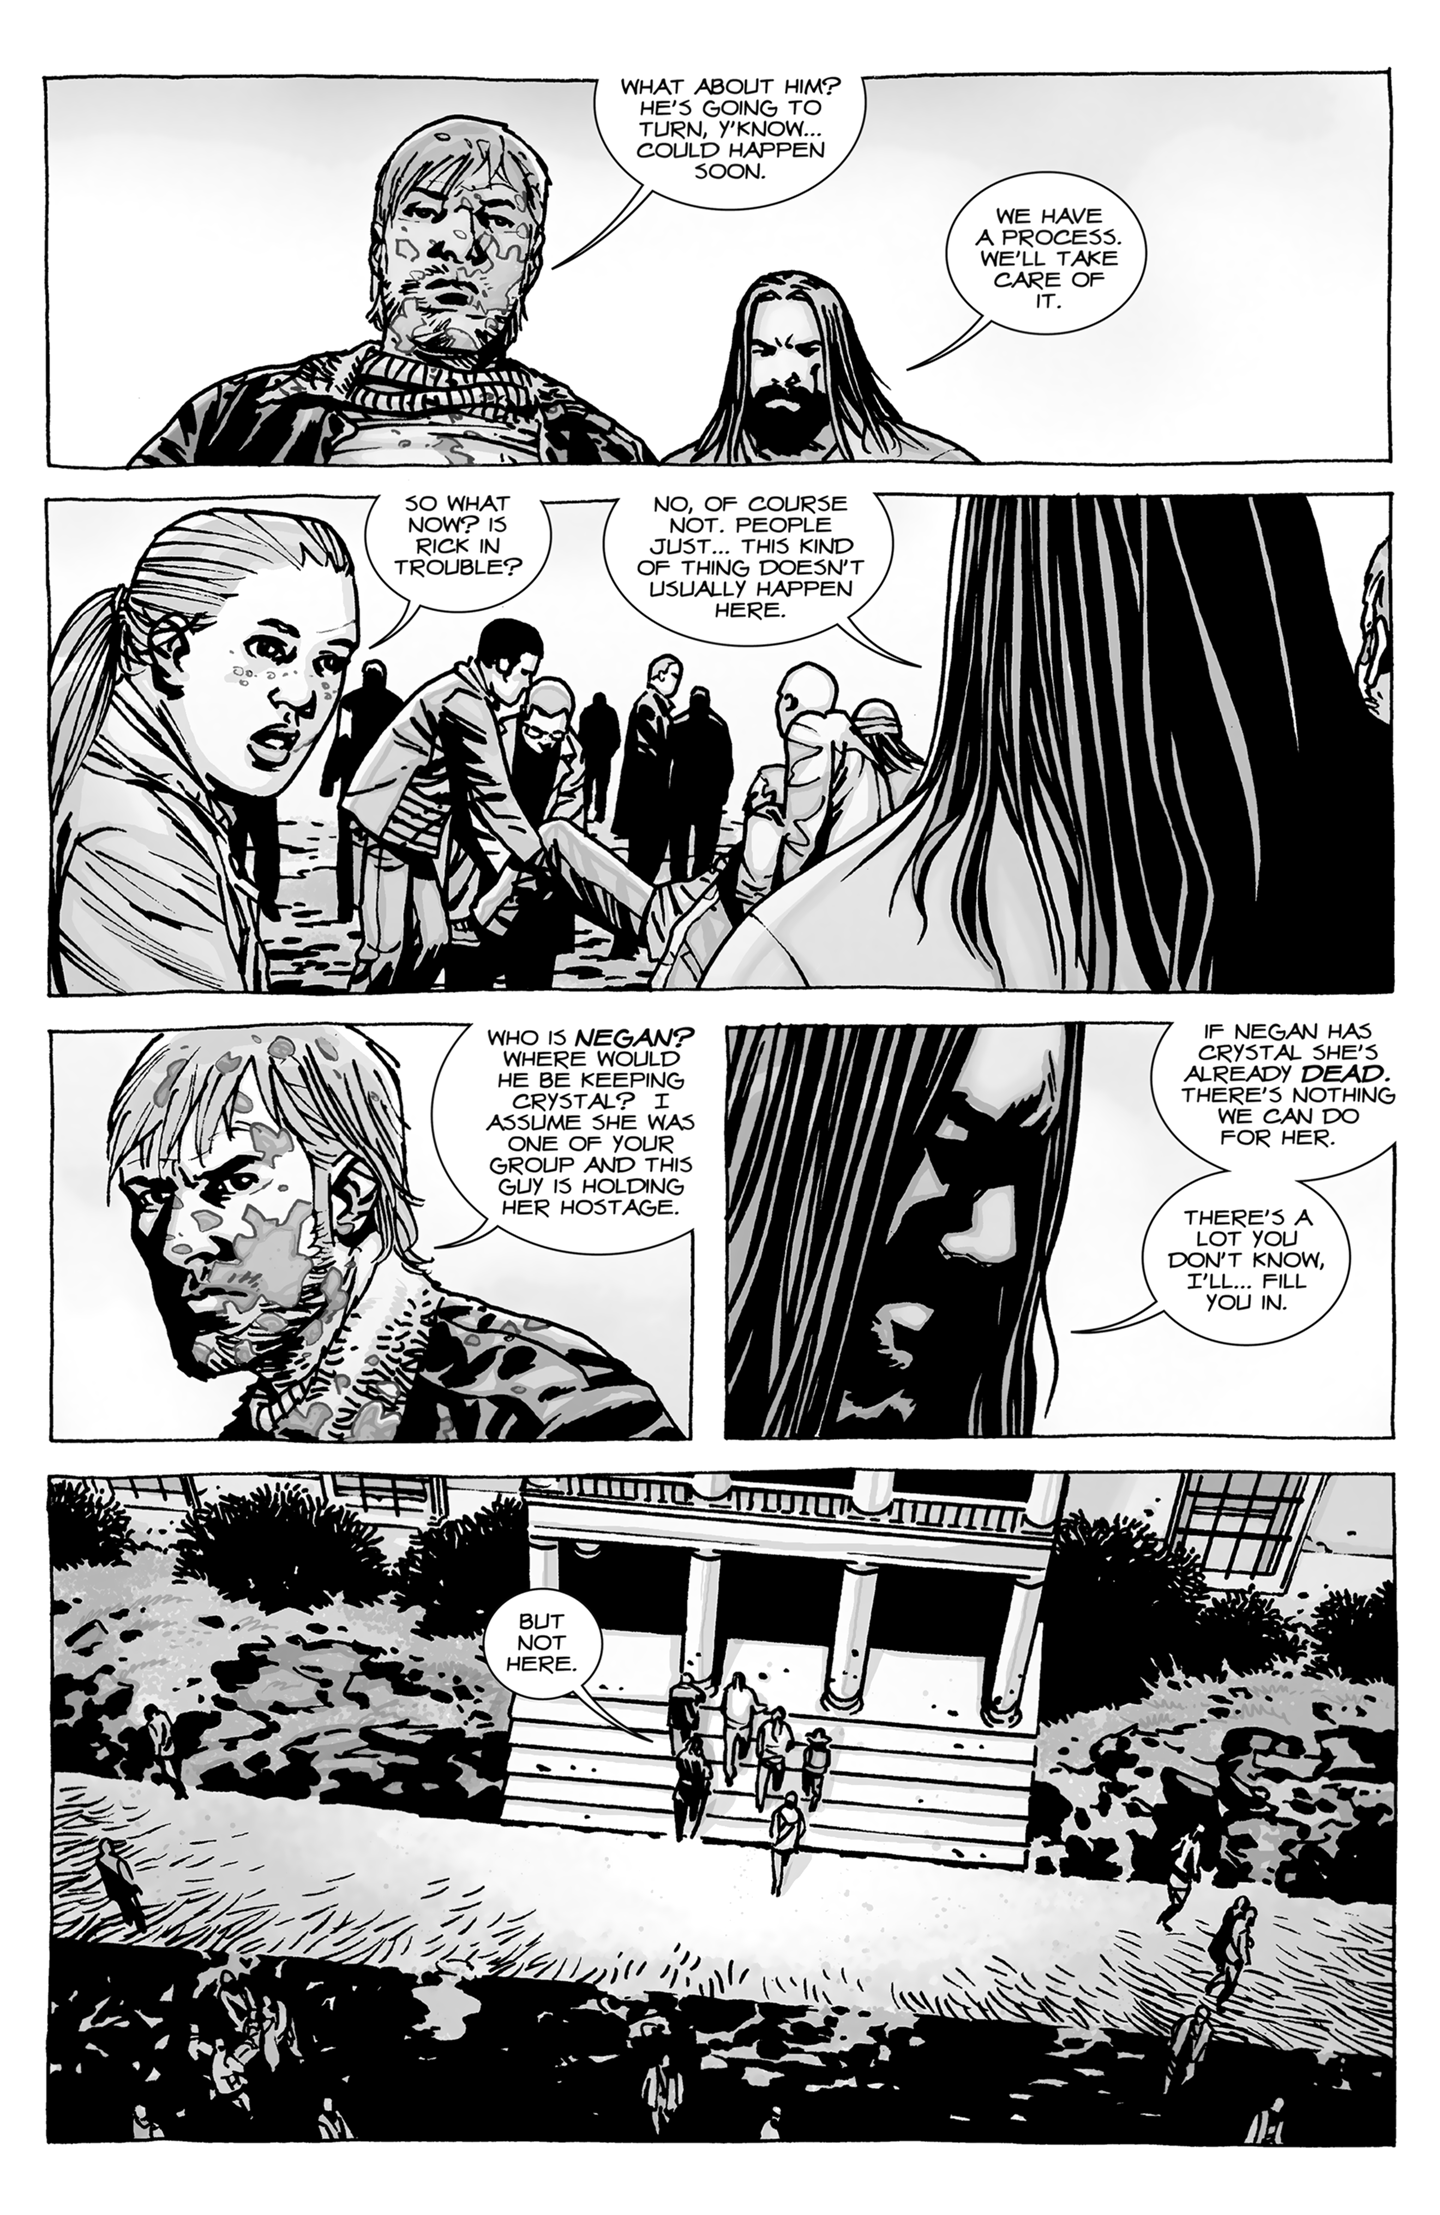 THE WALKING DEAD 96 - A LARGER WORLD, CONCLUSION